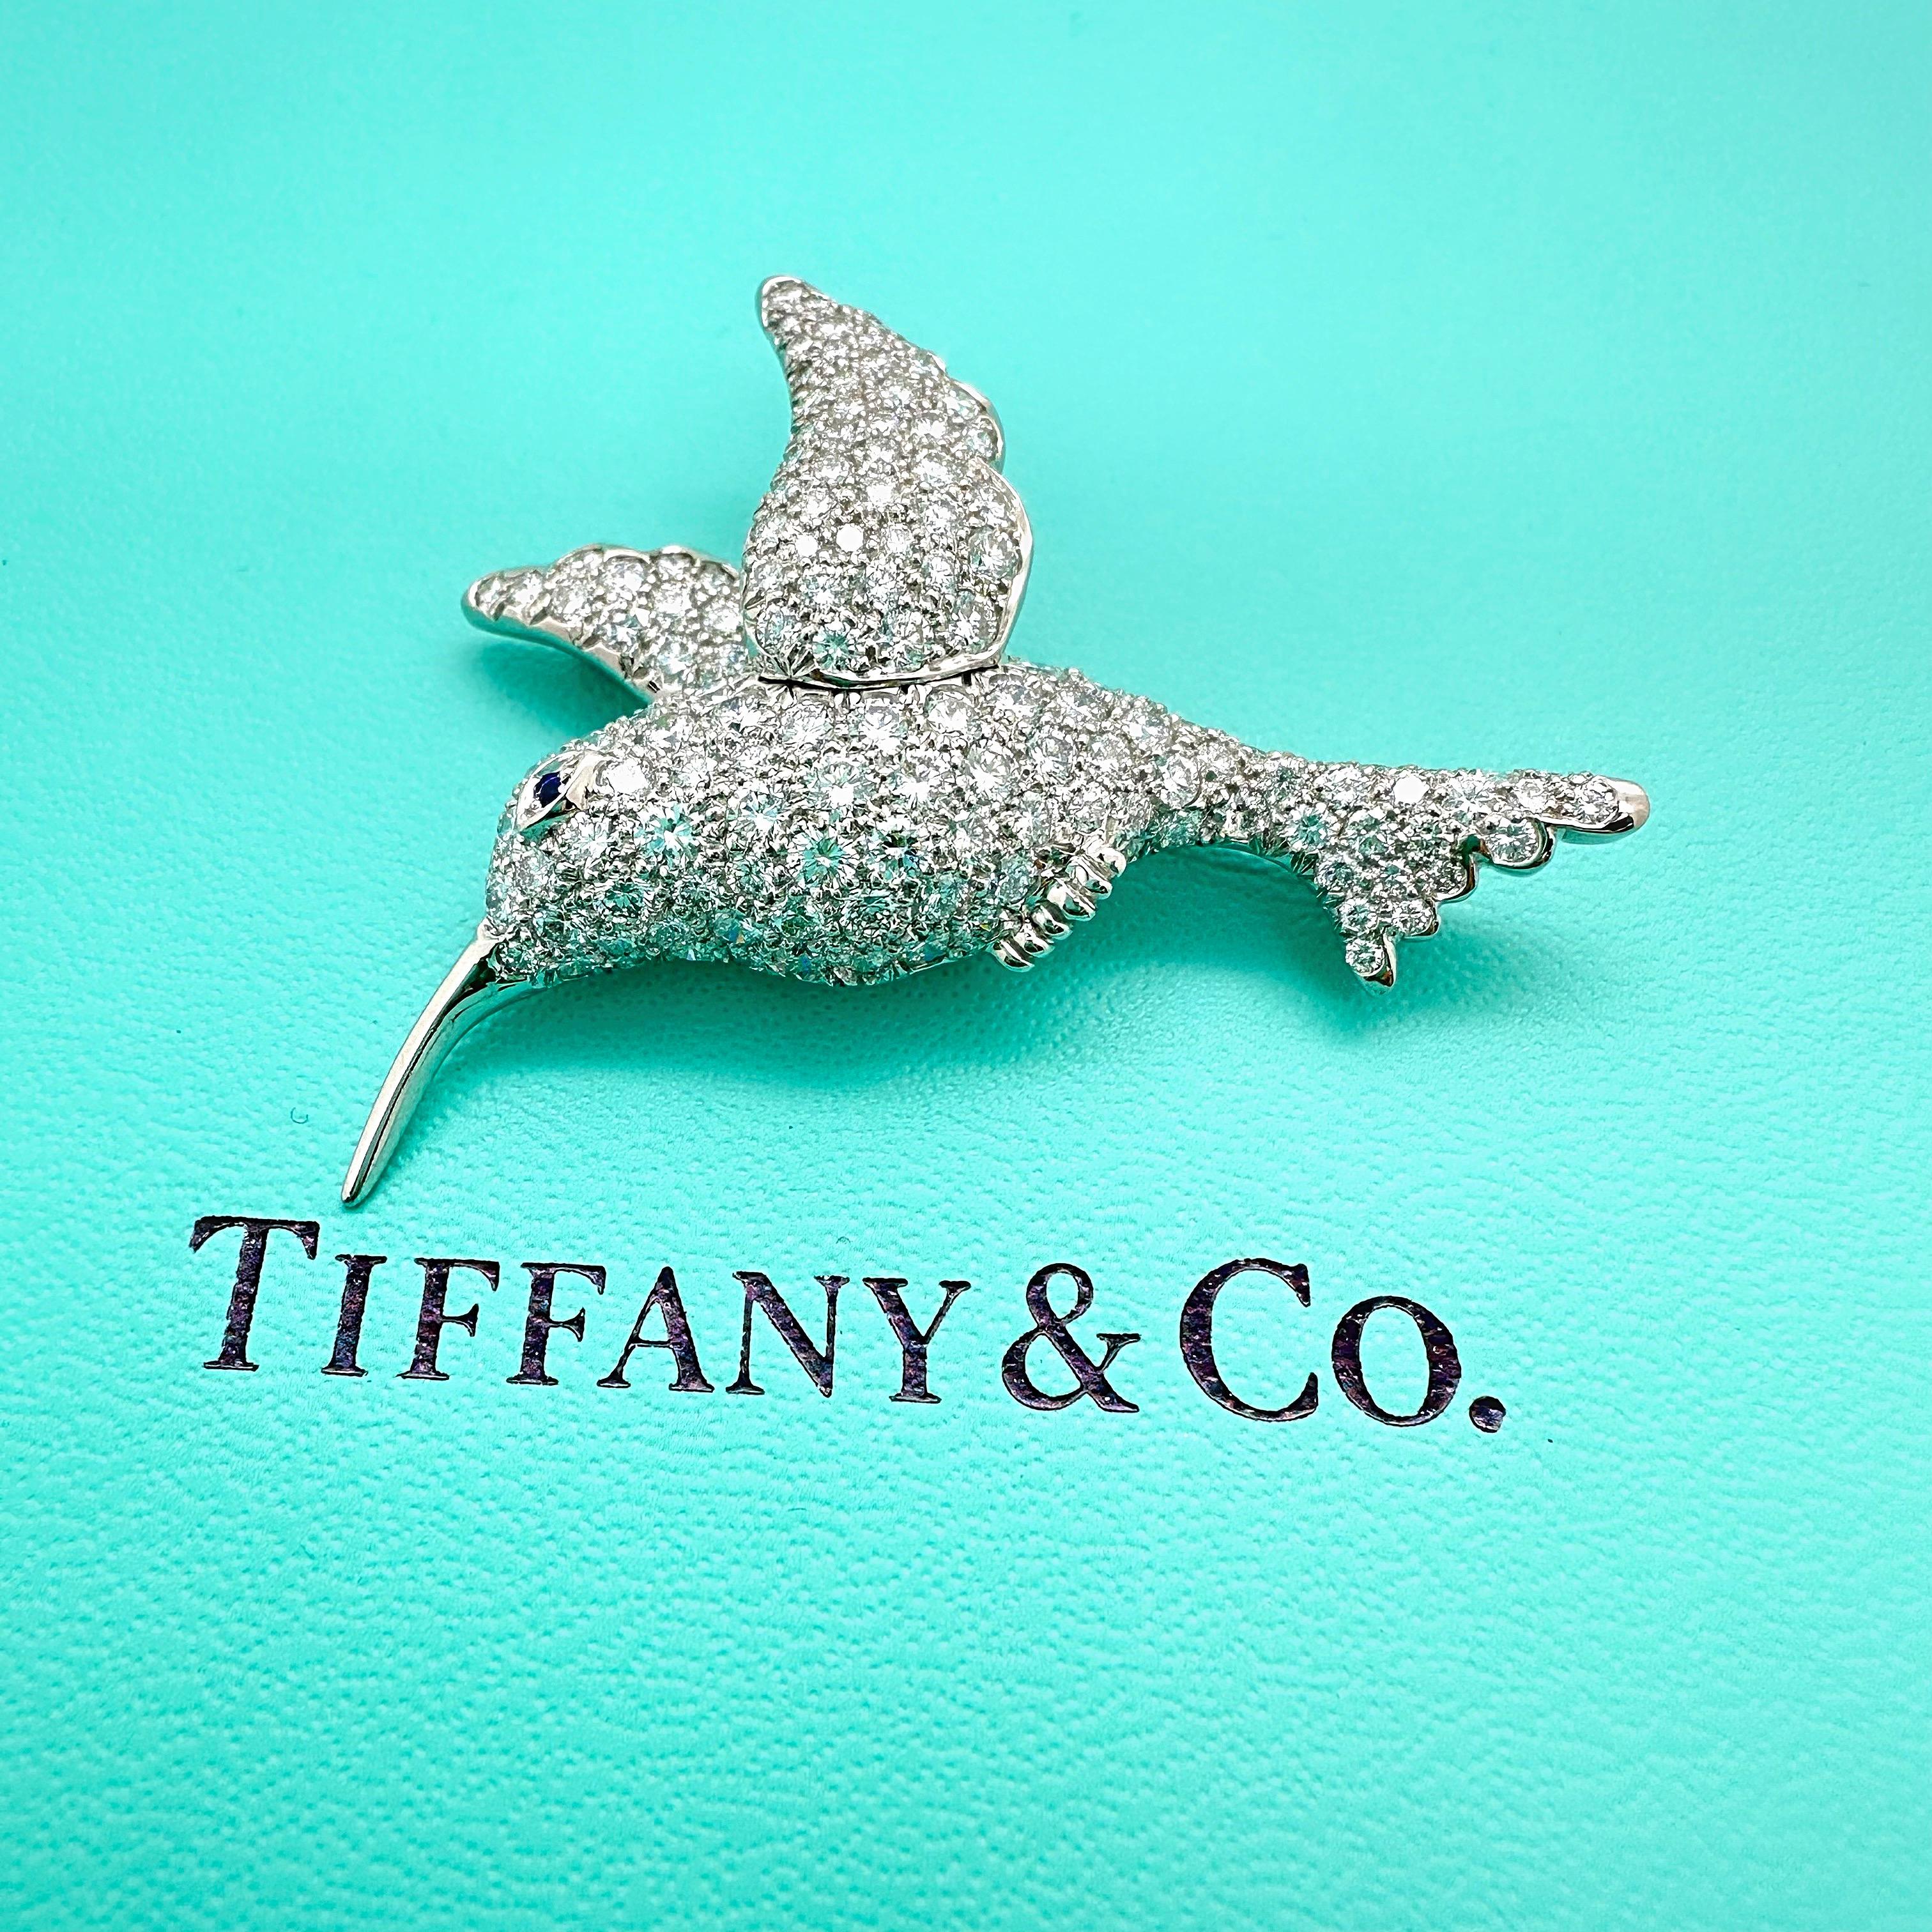 Tiffany & Co. Hummingbird Diamond Pin Brooch
Style: Vintage Pin / Brooch
Metal: Platinum PT950
Diamond Shape: Round Brilliant Diamonds & 1 Round Faceted Blue Sapphire 
Total Carat Weight: ~ 5.00 TCW
Dimensions: 2' x 1.5' Inches
Weight:  12.5